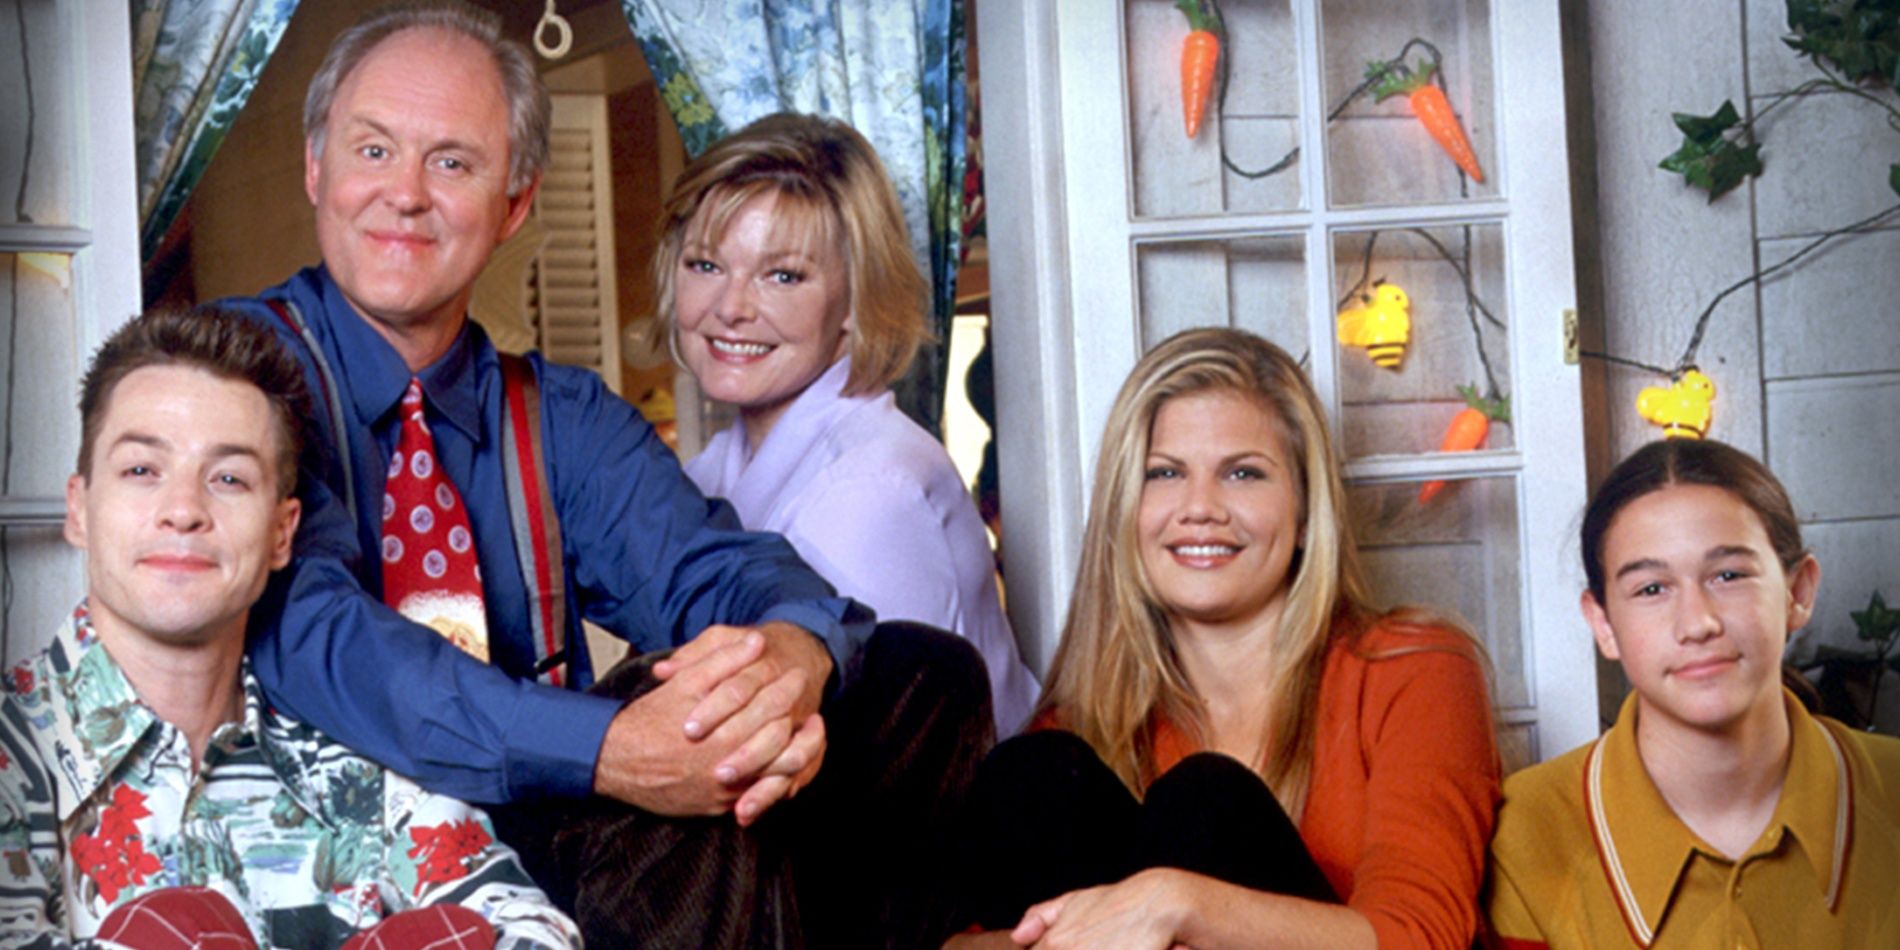 The cast of 3rd Rock from the Sun pose together for a promo photo